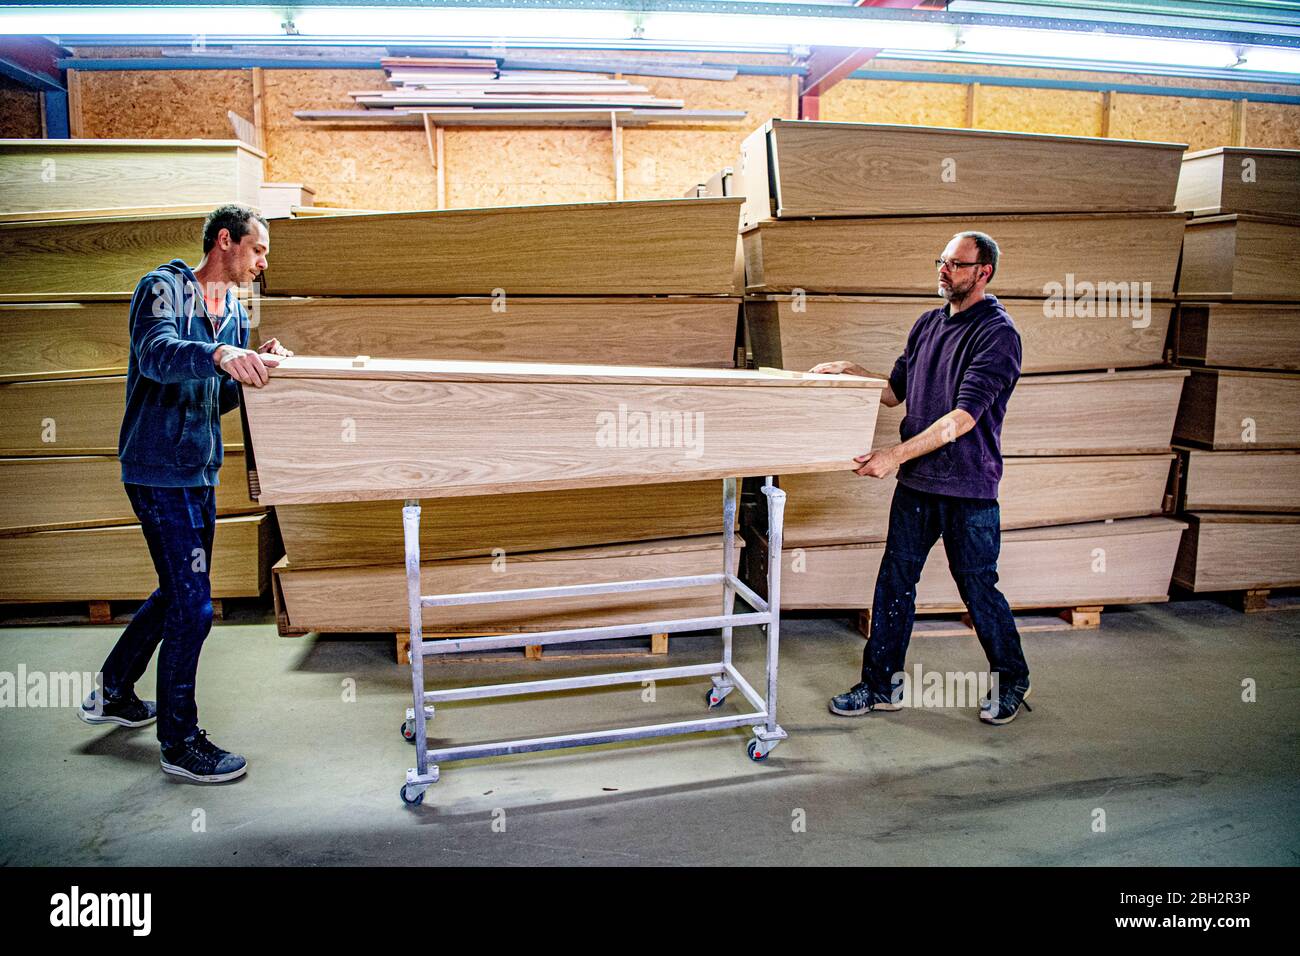 Gendringe, Netherlands. 23rd Apr, 2020. Employees pushing a casket at Tomba coffin maker.As the Coronavirus pandemic ravages Netherlands one coffin design firm south of Gendering has been busy delivering hundreds of caskets per week to double the usual production capacity. Coffin makers and the funeral industry at large are working hard. Credit: SOPA Images Limited/Alamy Live News Stock Photo